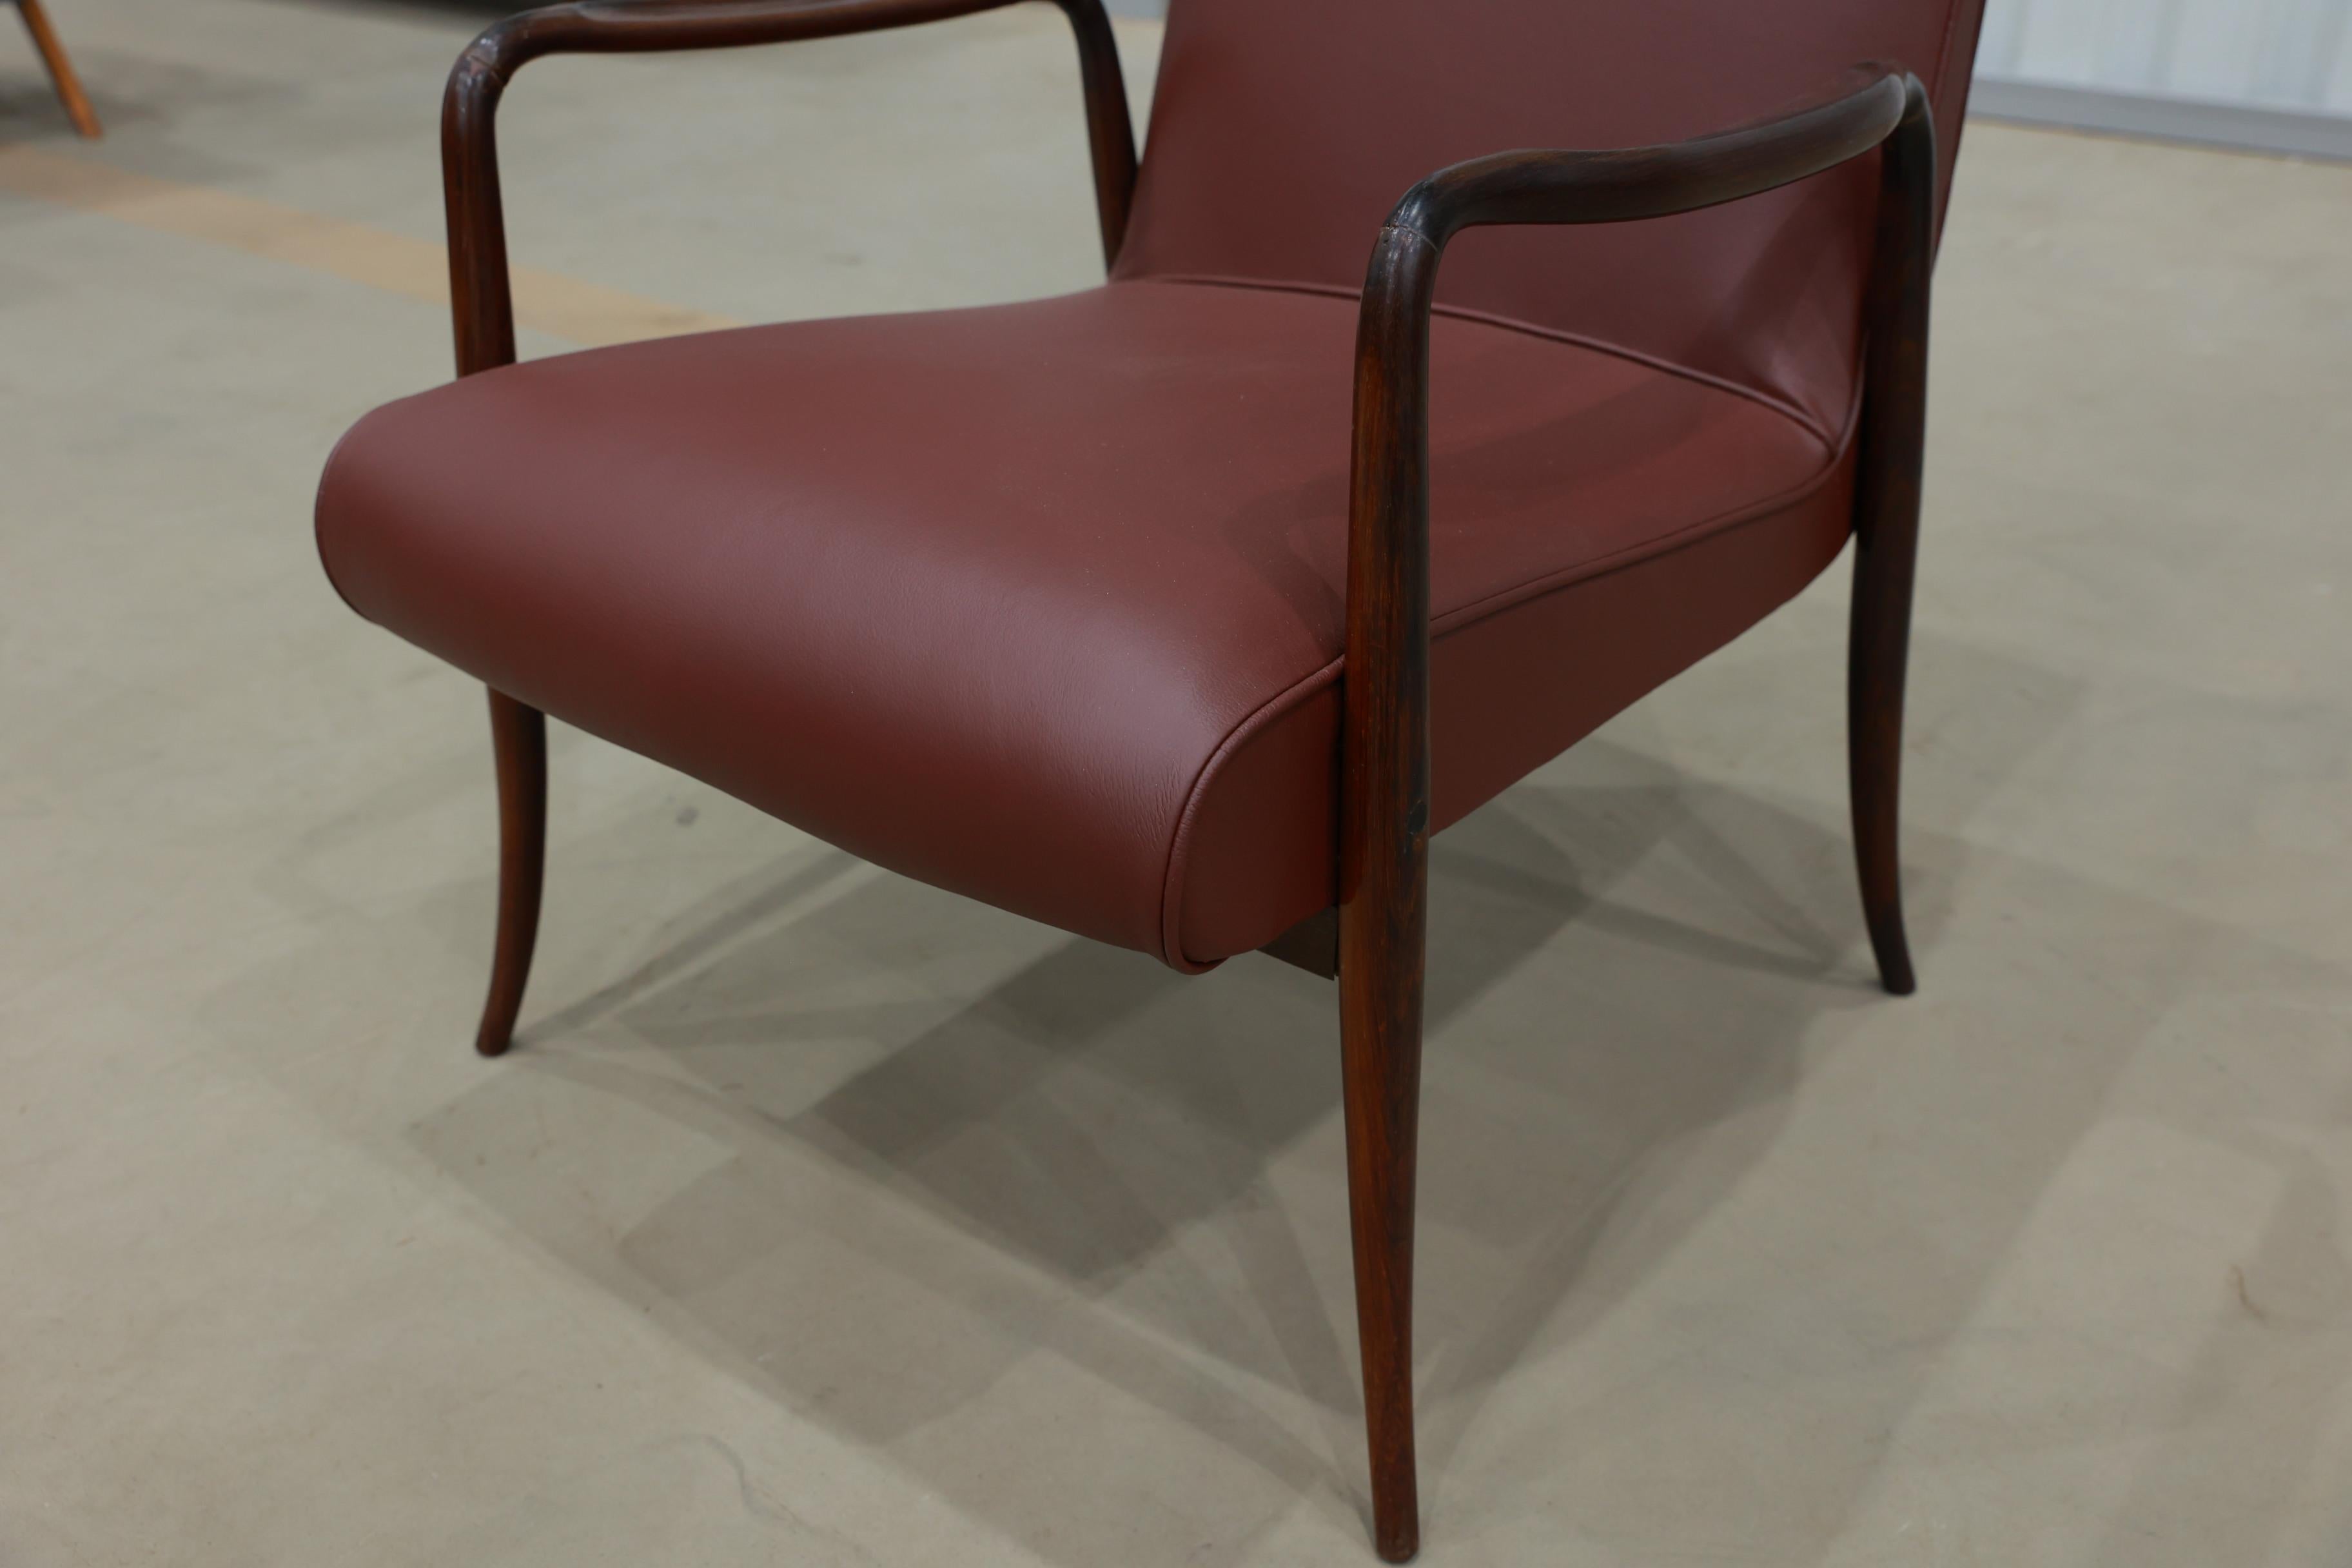 Brazilian Pair of “Leve” armchairs in hardwood & leather by Joaquim Tenreiro, 1942, Brazil For Sale